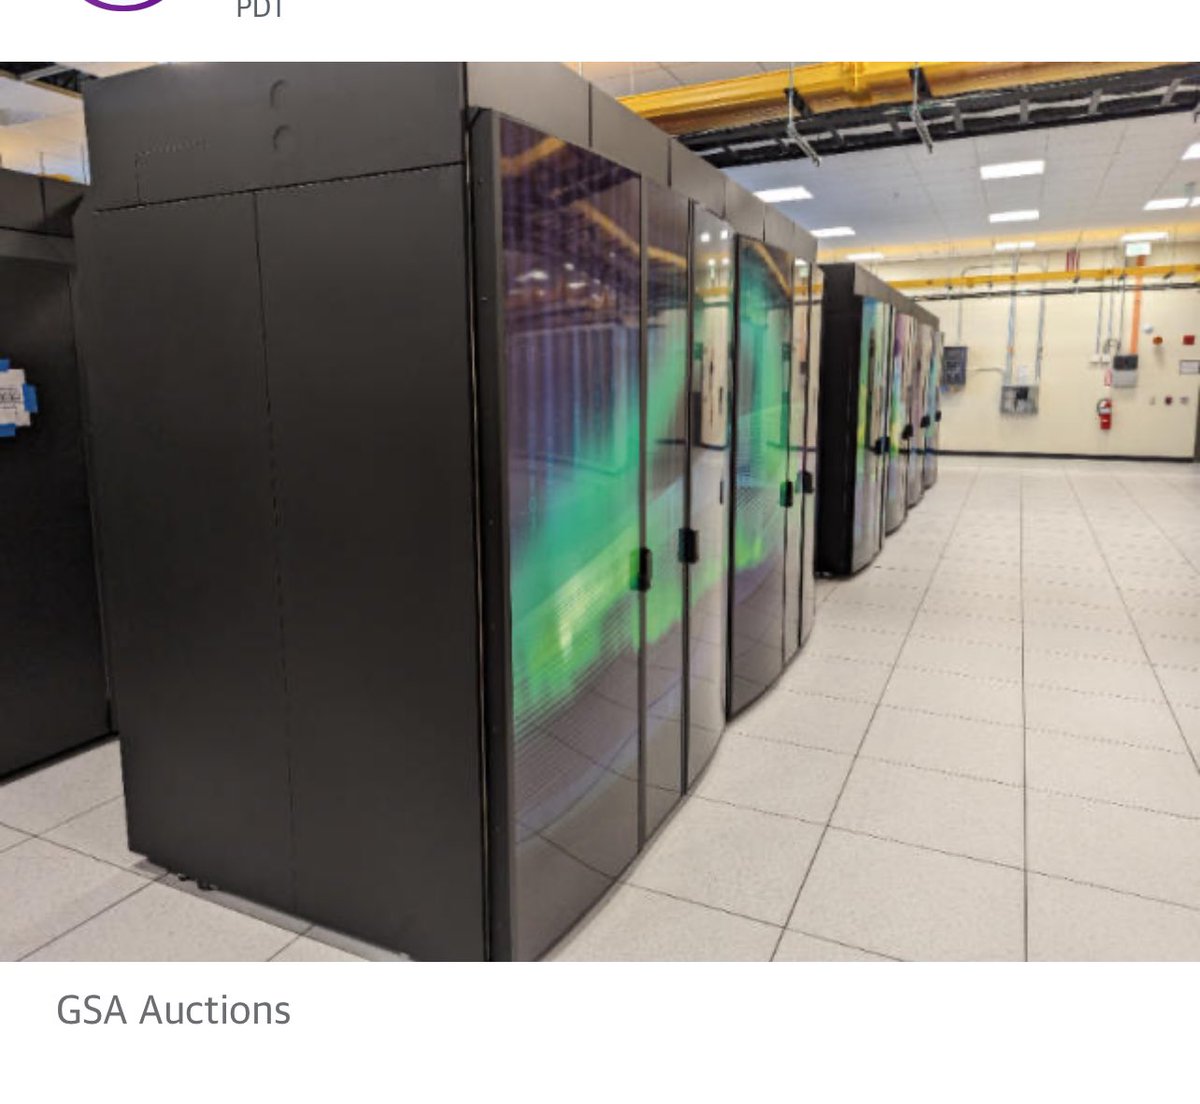 Ex-US Government Supercomputer Up for Grabs The #Cheyenne #supercomputer, once a powerhouse for the US government, is now up for auction. With a fraction of its list price, the auction has garnered attention on social media, with users playfully imagining the possibilities of…